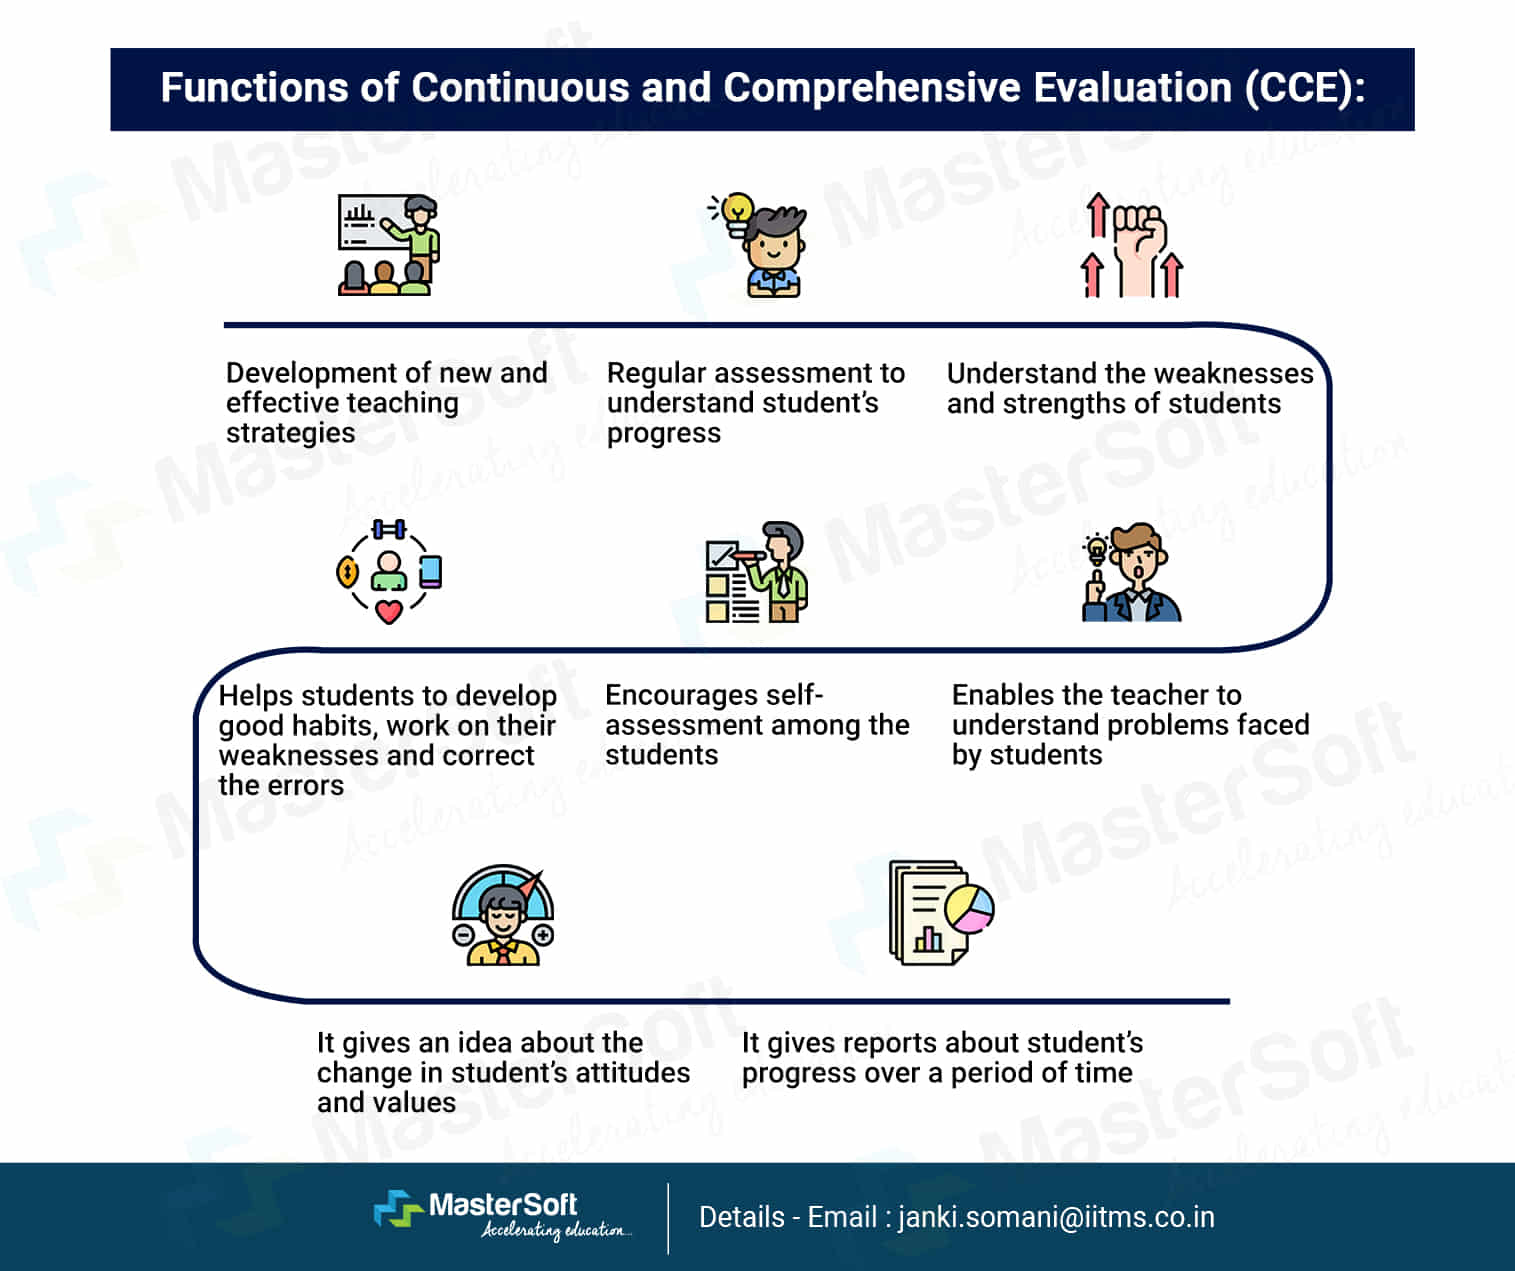 Functions-of-Continuous-and-Comprehensive-Evaluation-(CCE)